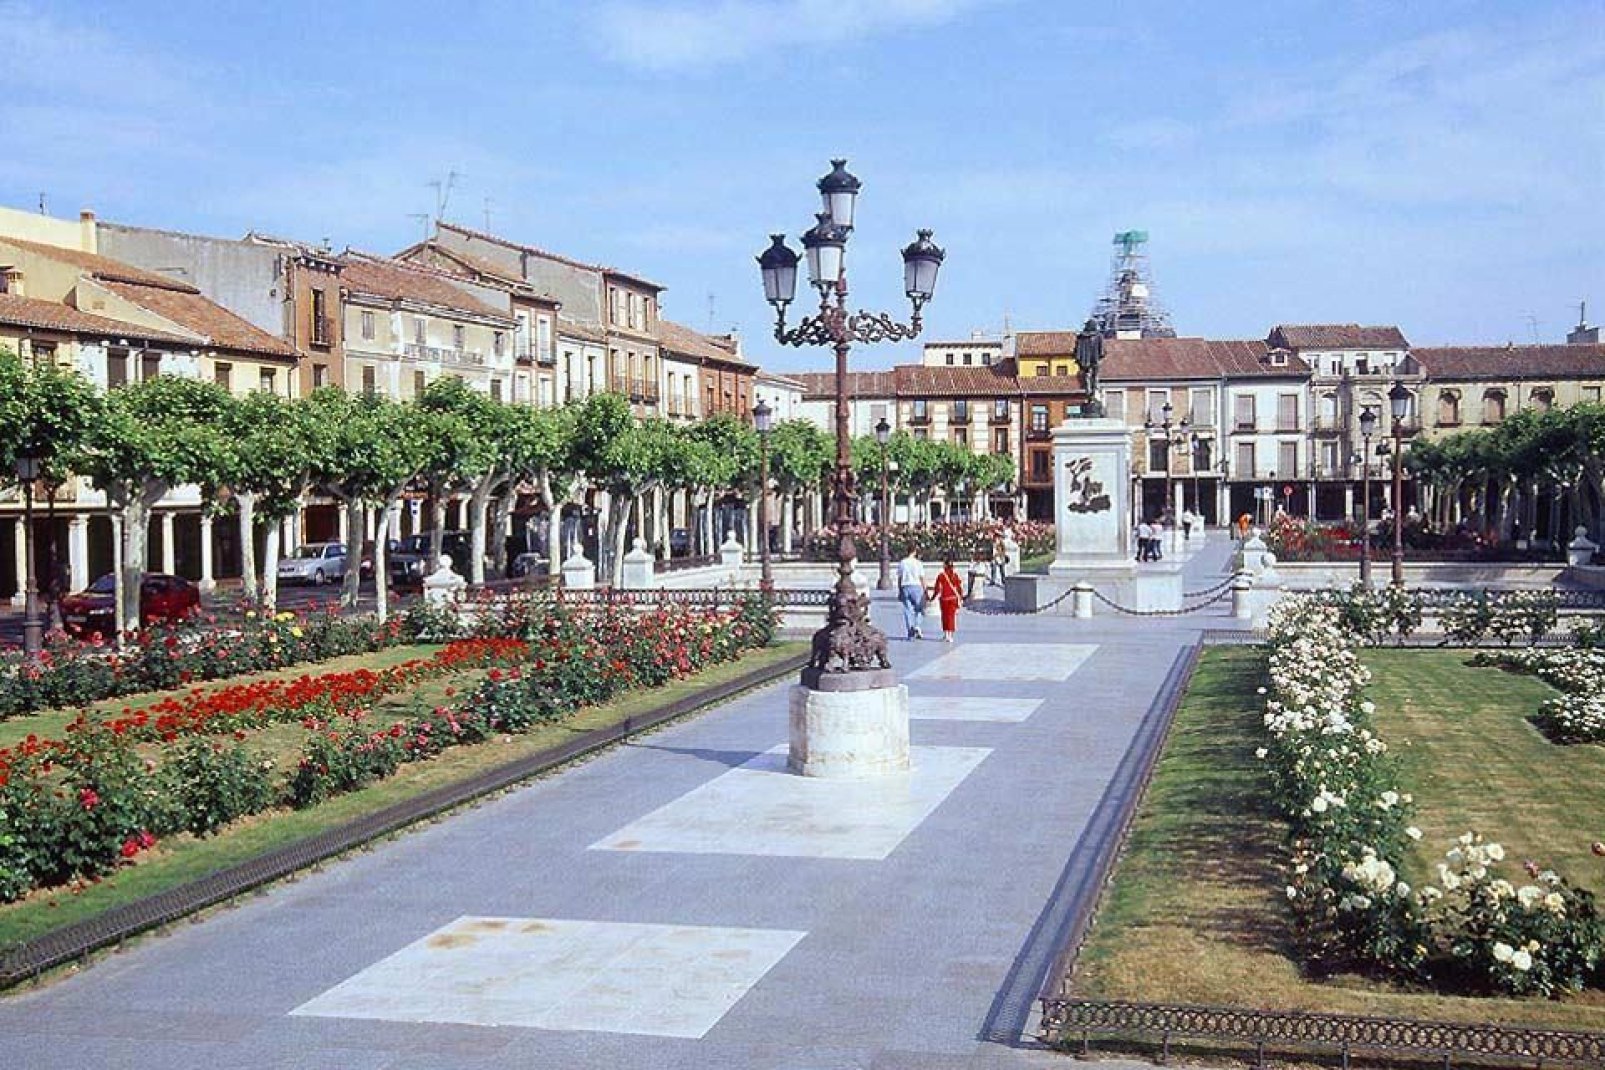 This square represents the city centre of Alcala de Henares. Author Miguel De Cervantès was born in this city and a statue of Don Quixote stands on the square in his honour.